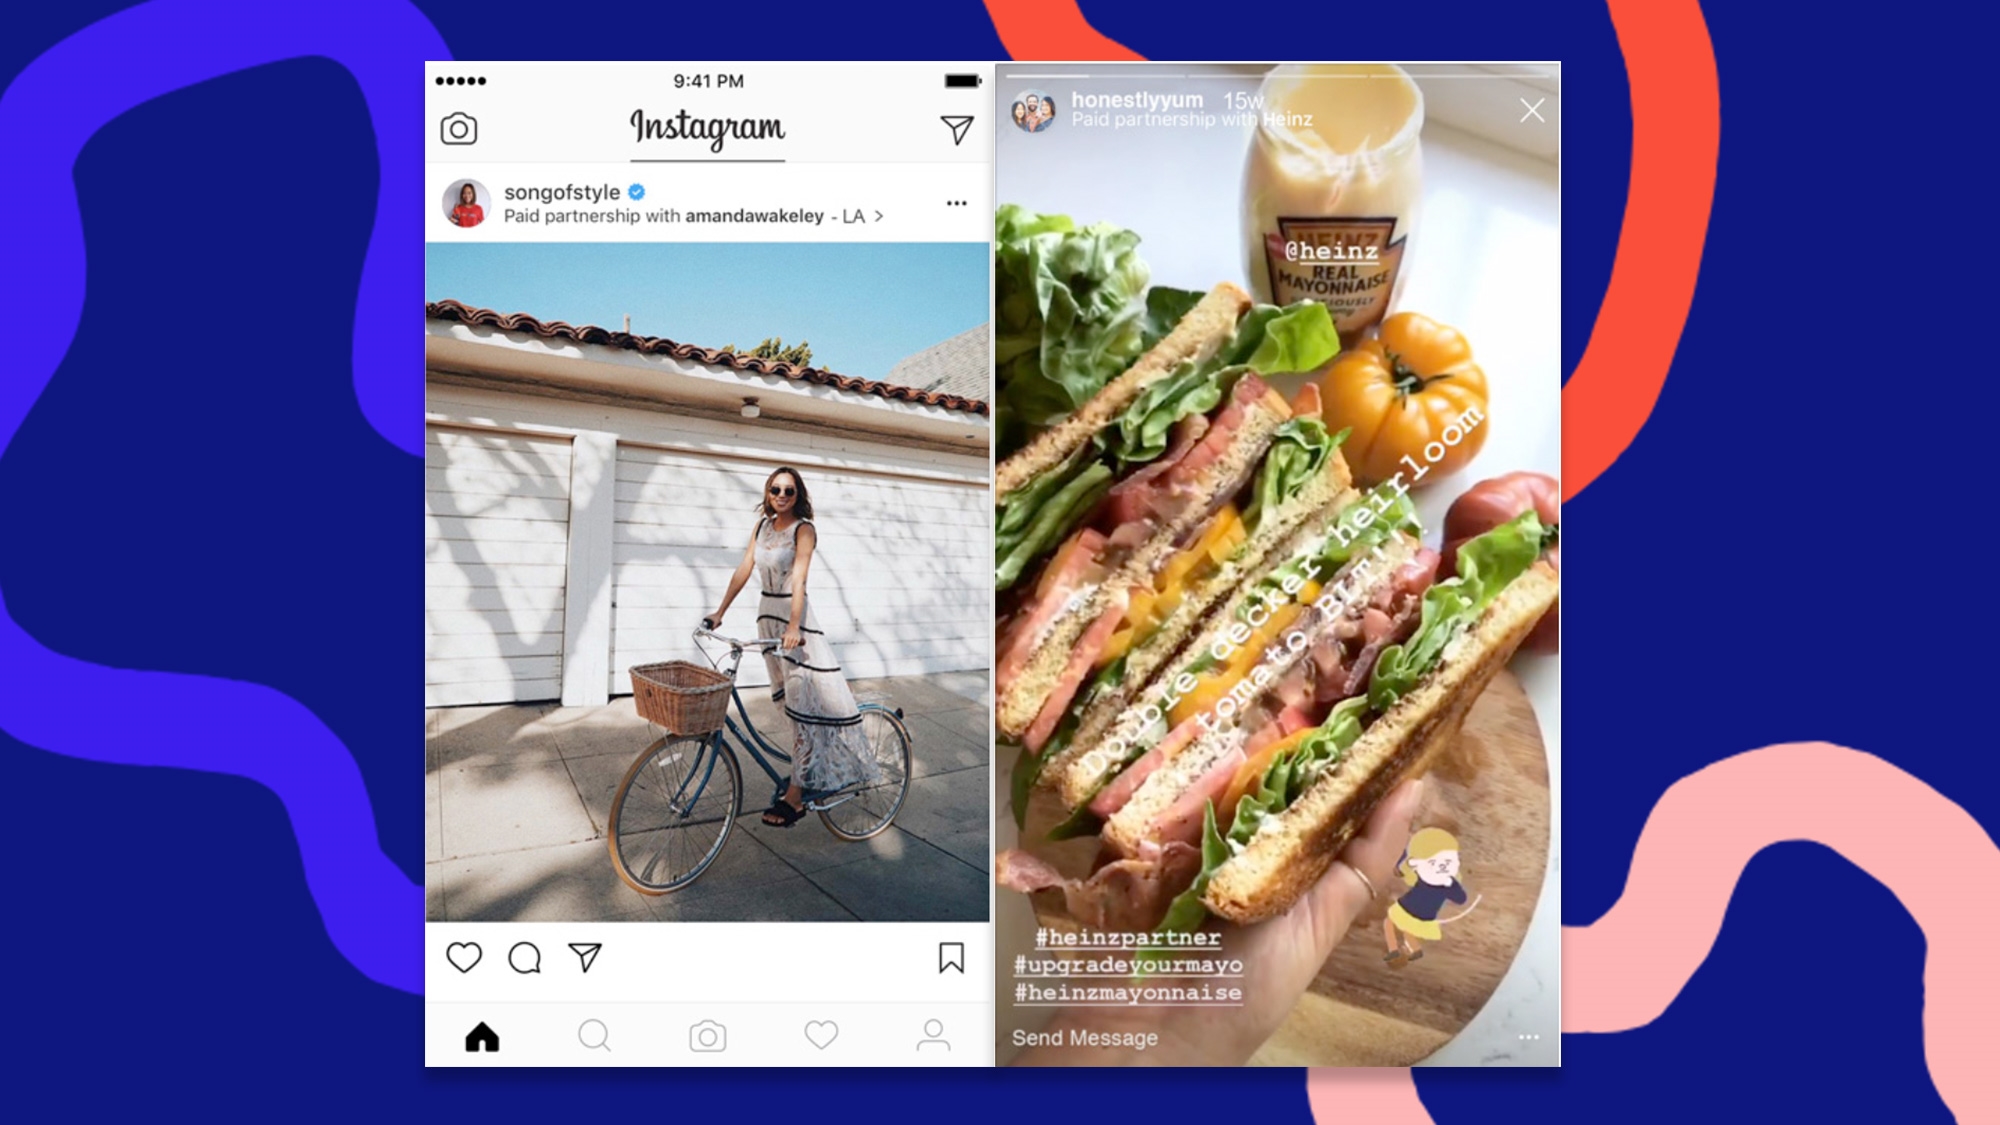 How and Why to Use the Paid Partnership Feature on Instagram